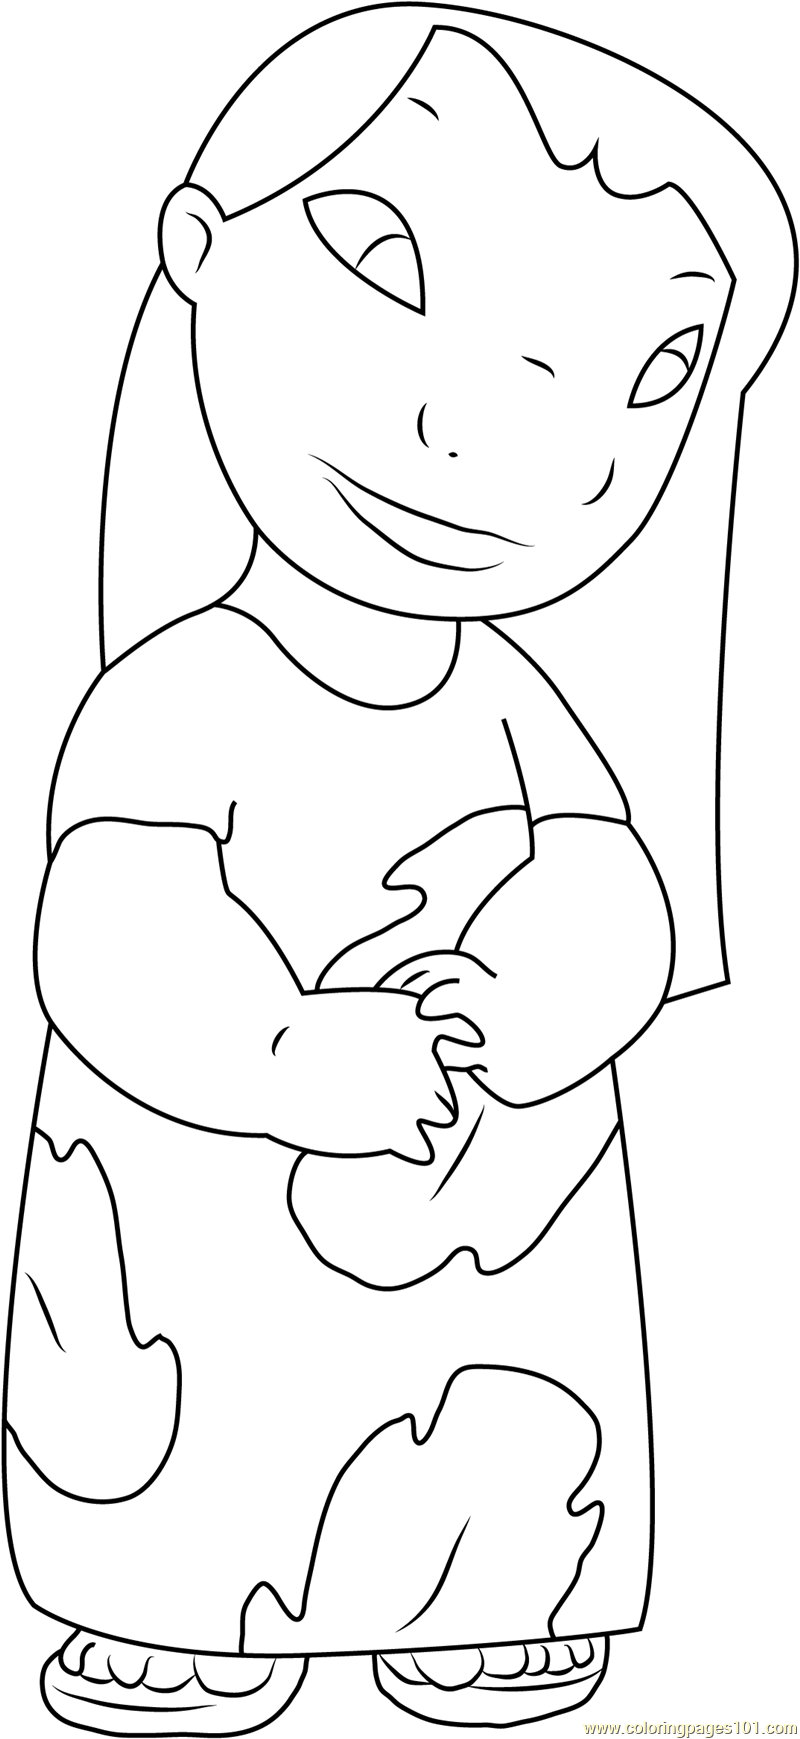 Beautiful Lilo Coloring Page - Free Lilo & Stitch Coloring Pages